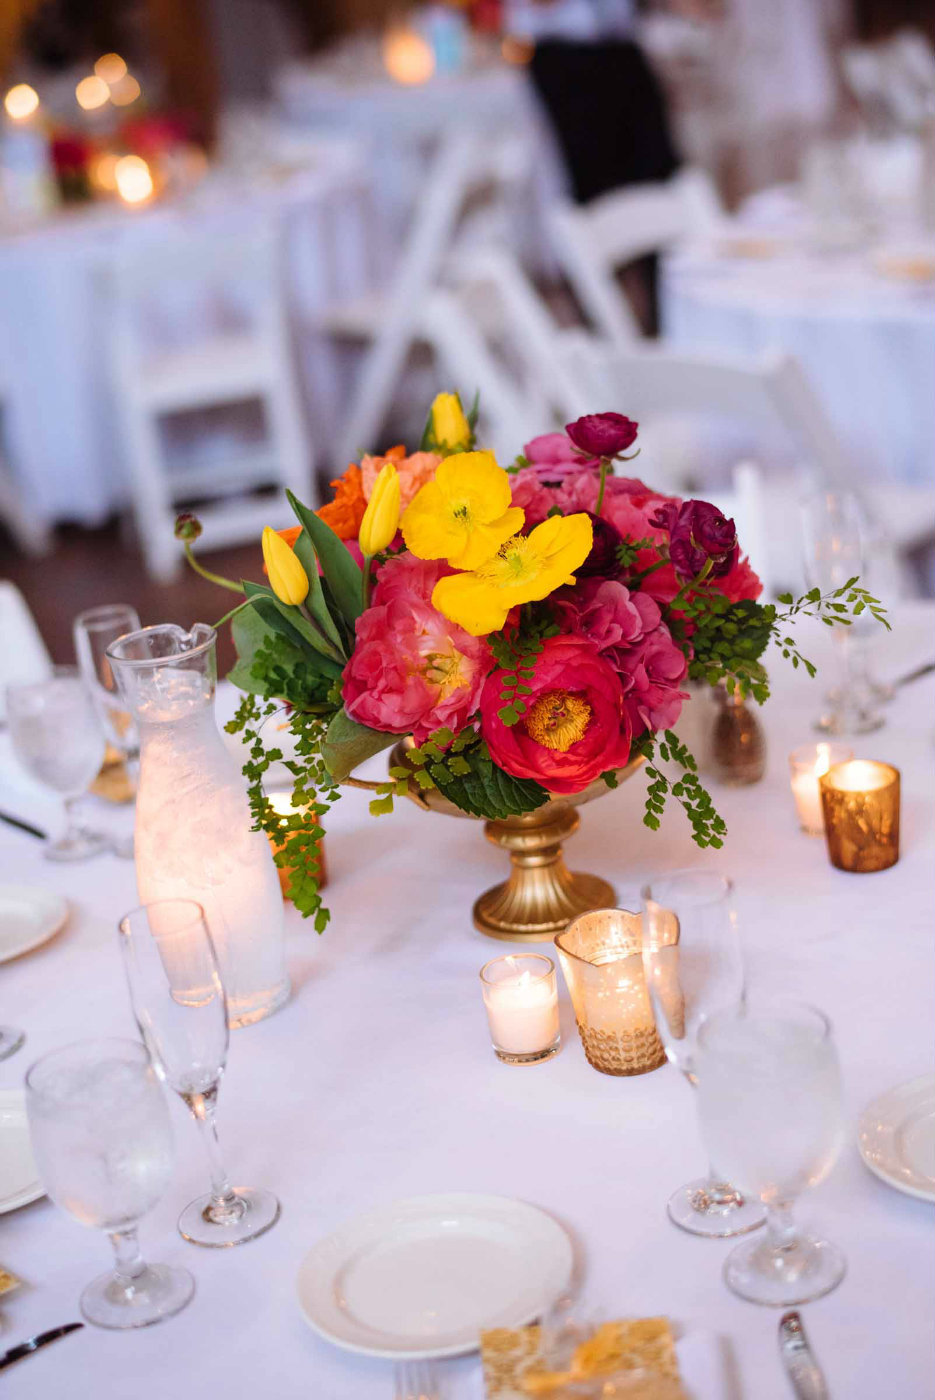 Low gold urn flowers with coral charm peonies, maidenhair fern and poppies are so bright and happy!